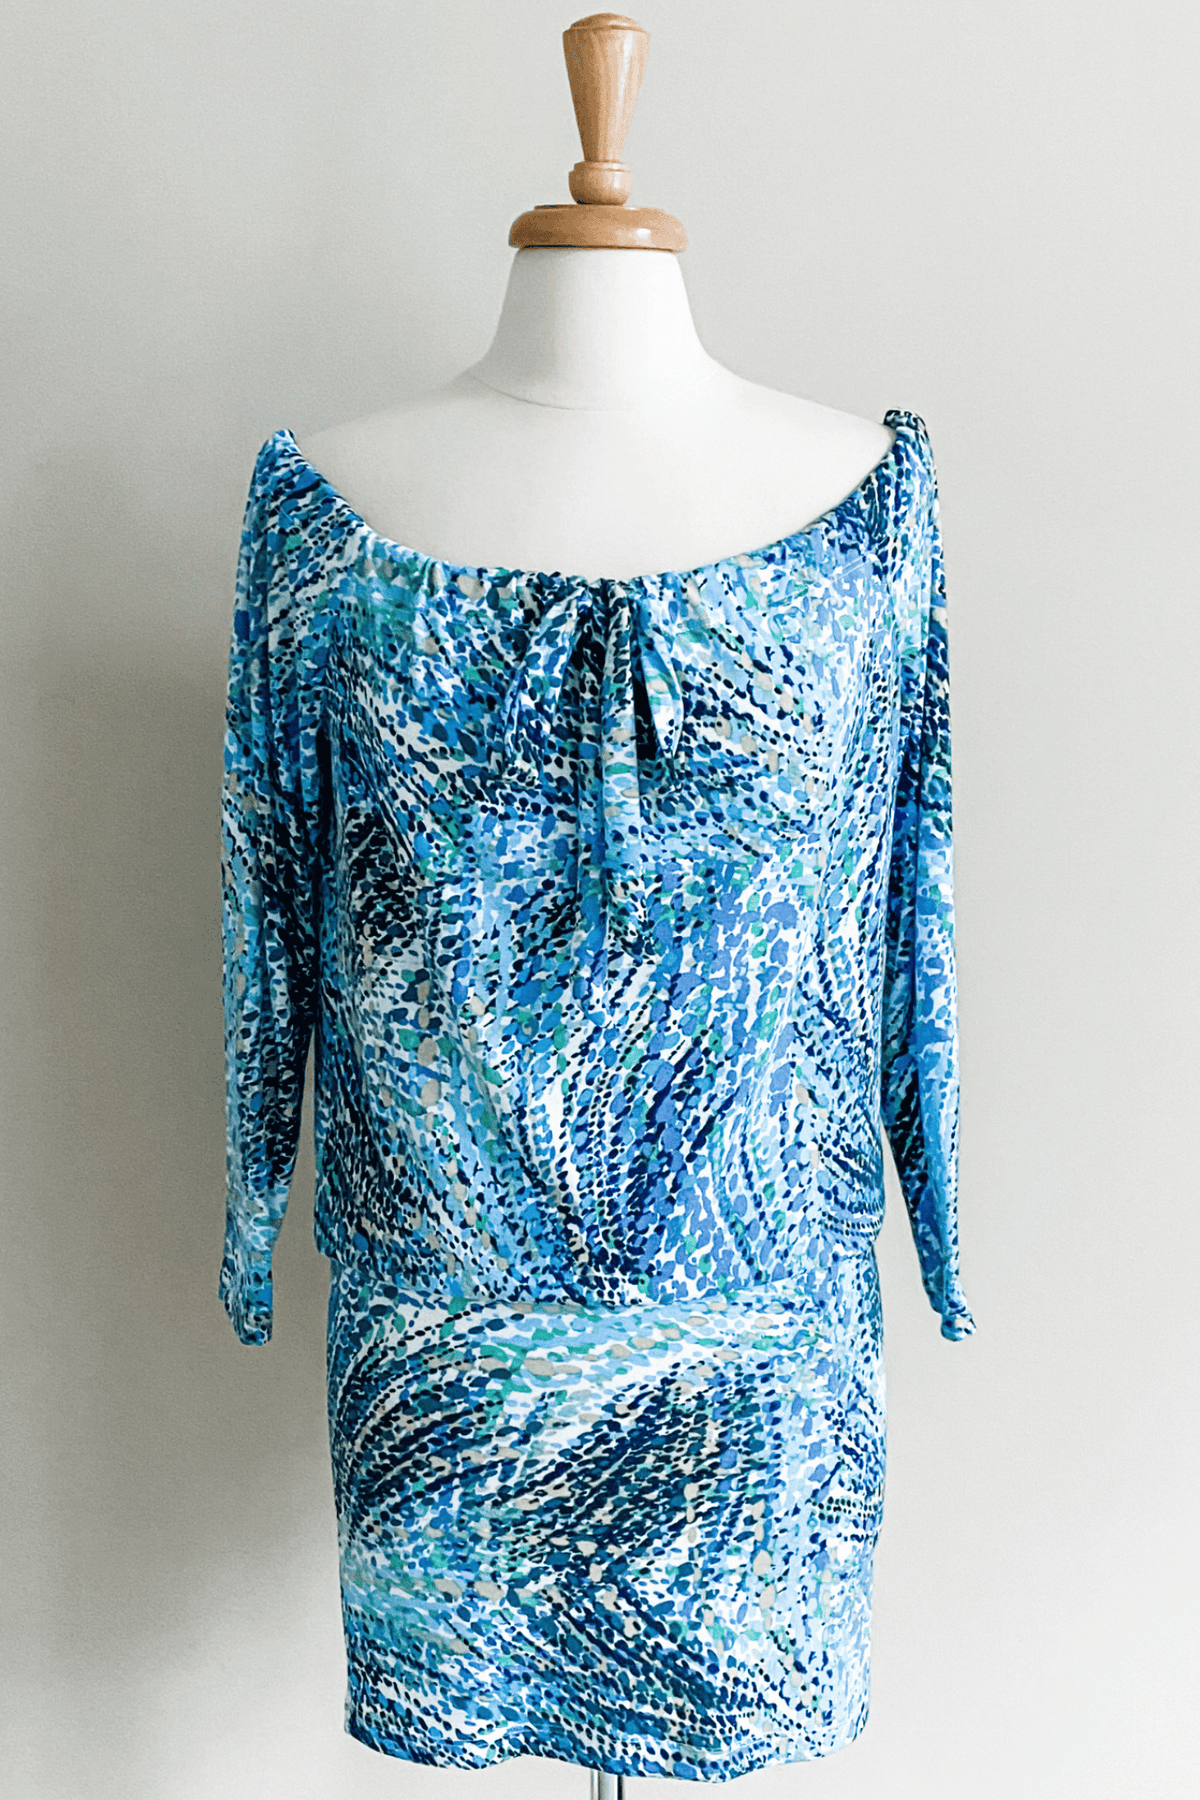 Diane Kroe Evermore Dress (Whirlpool Turquoise Chartreuse) - Warm Weather Capsule Collection